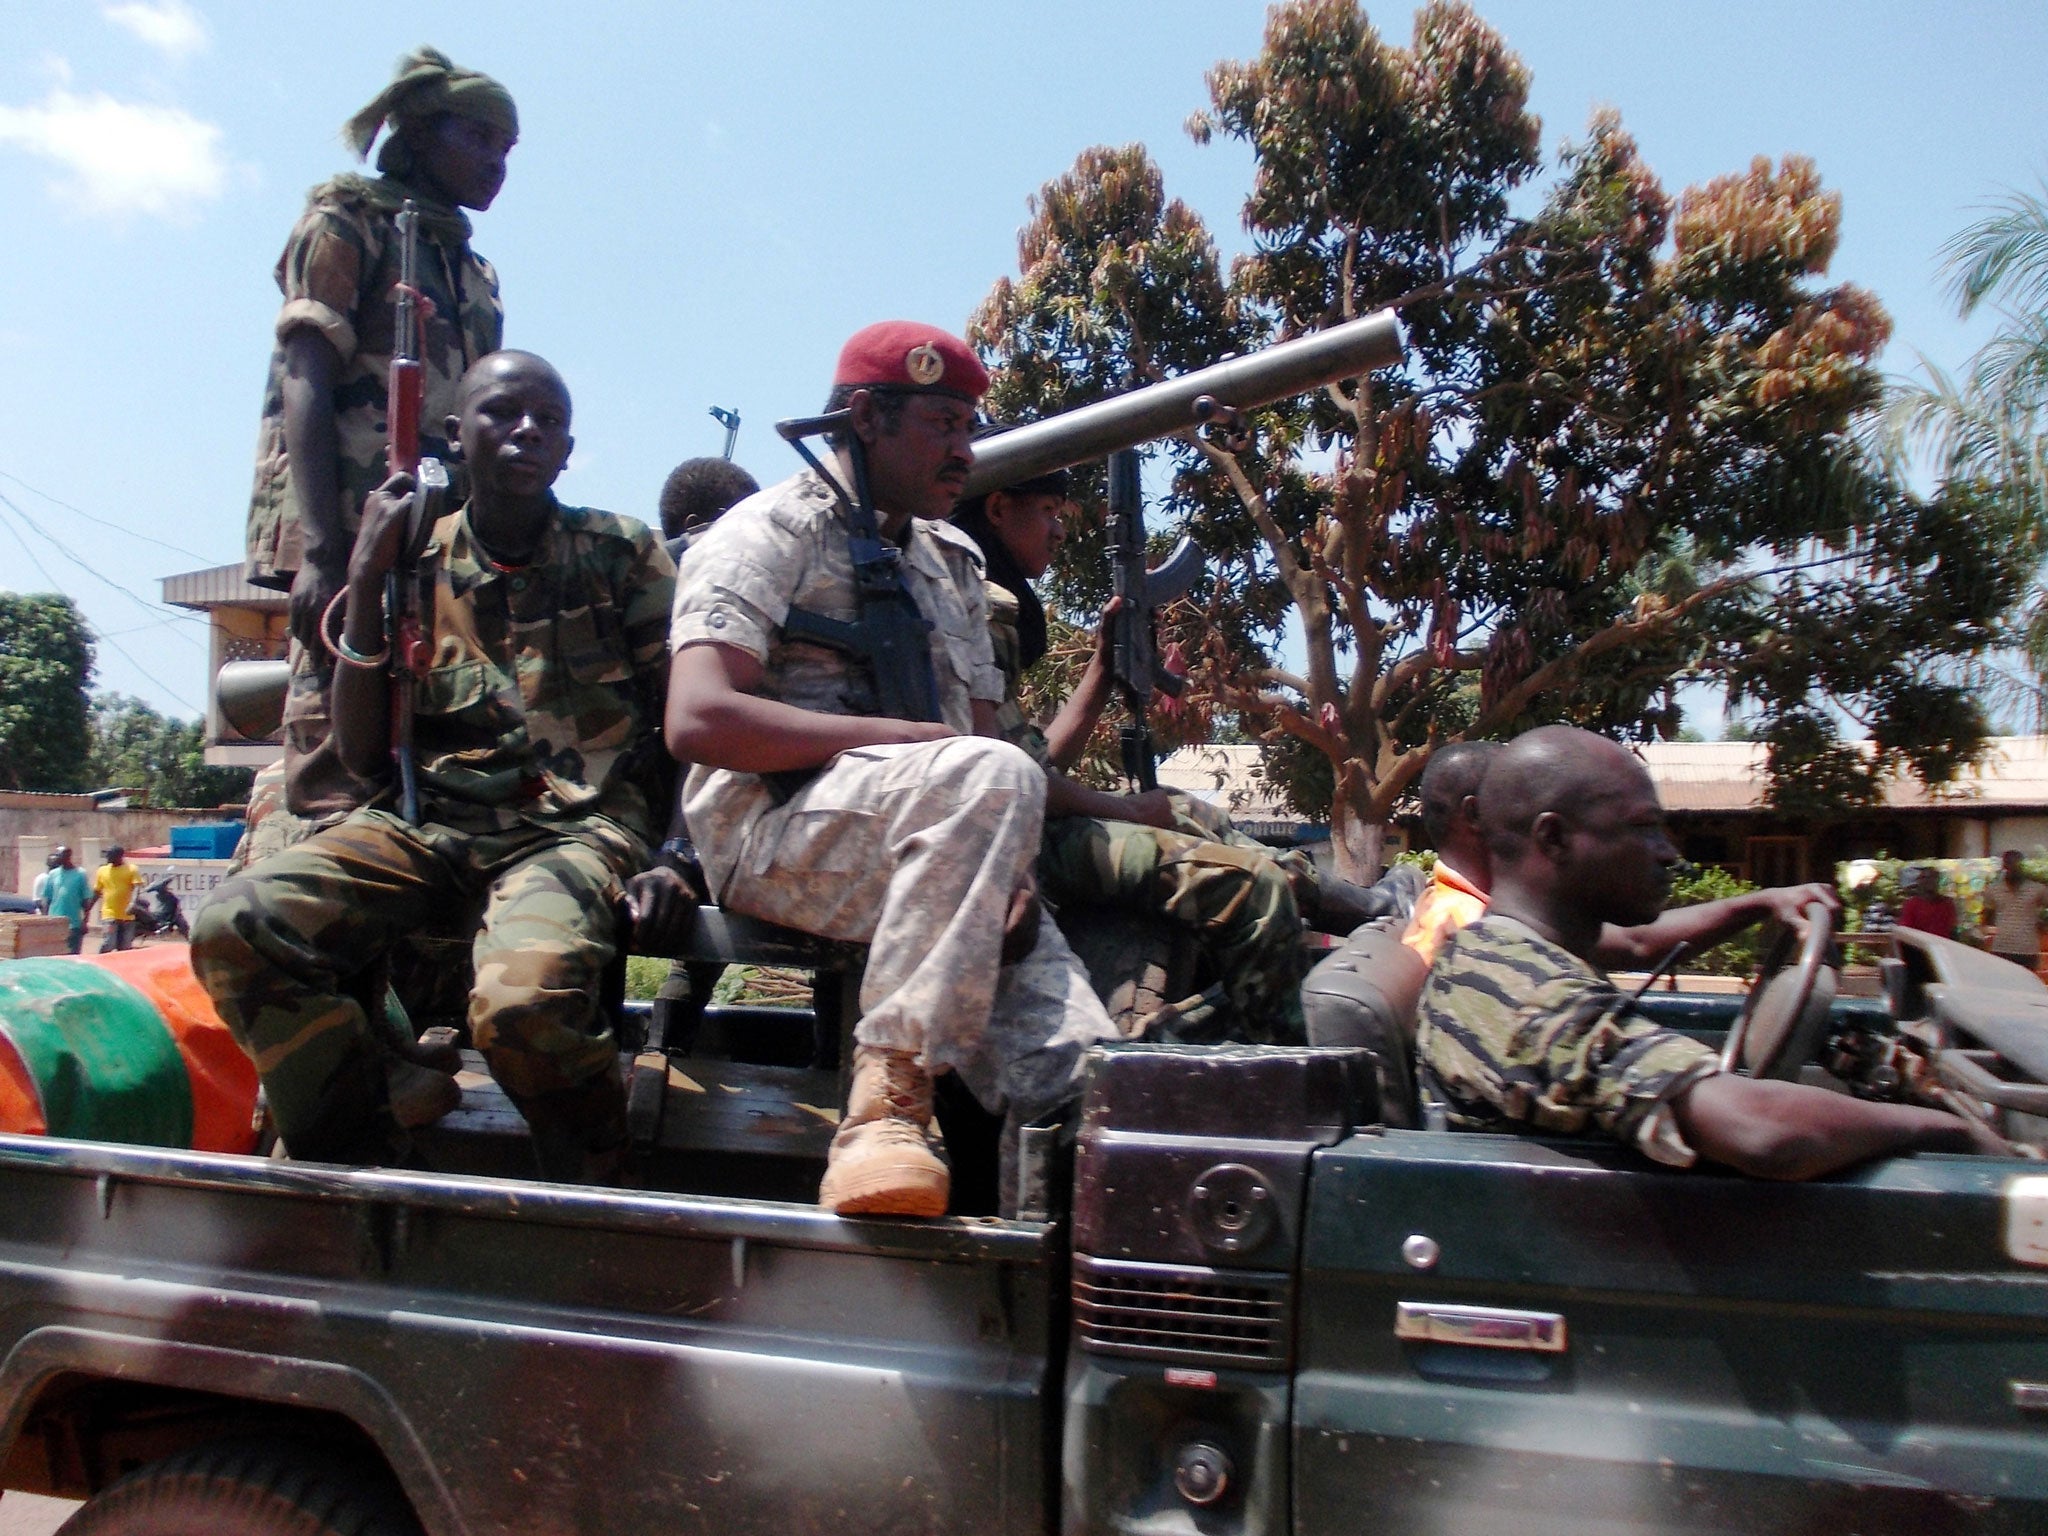 Seleka soldiers from the ruling rebel coalition leave the capital Bangui on September 10, 2013